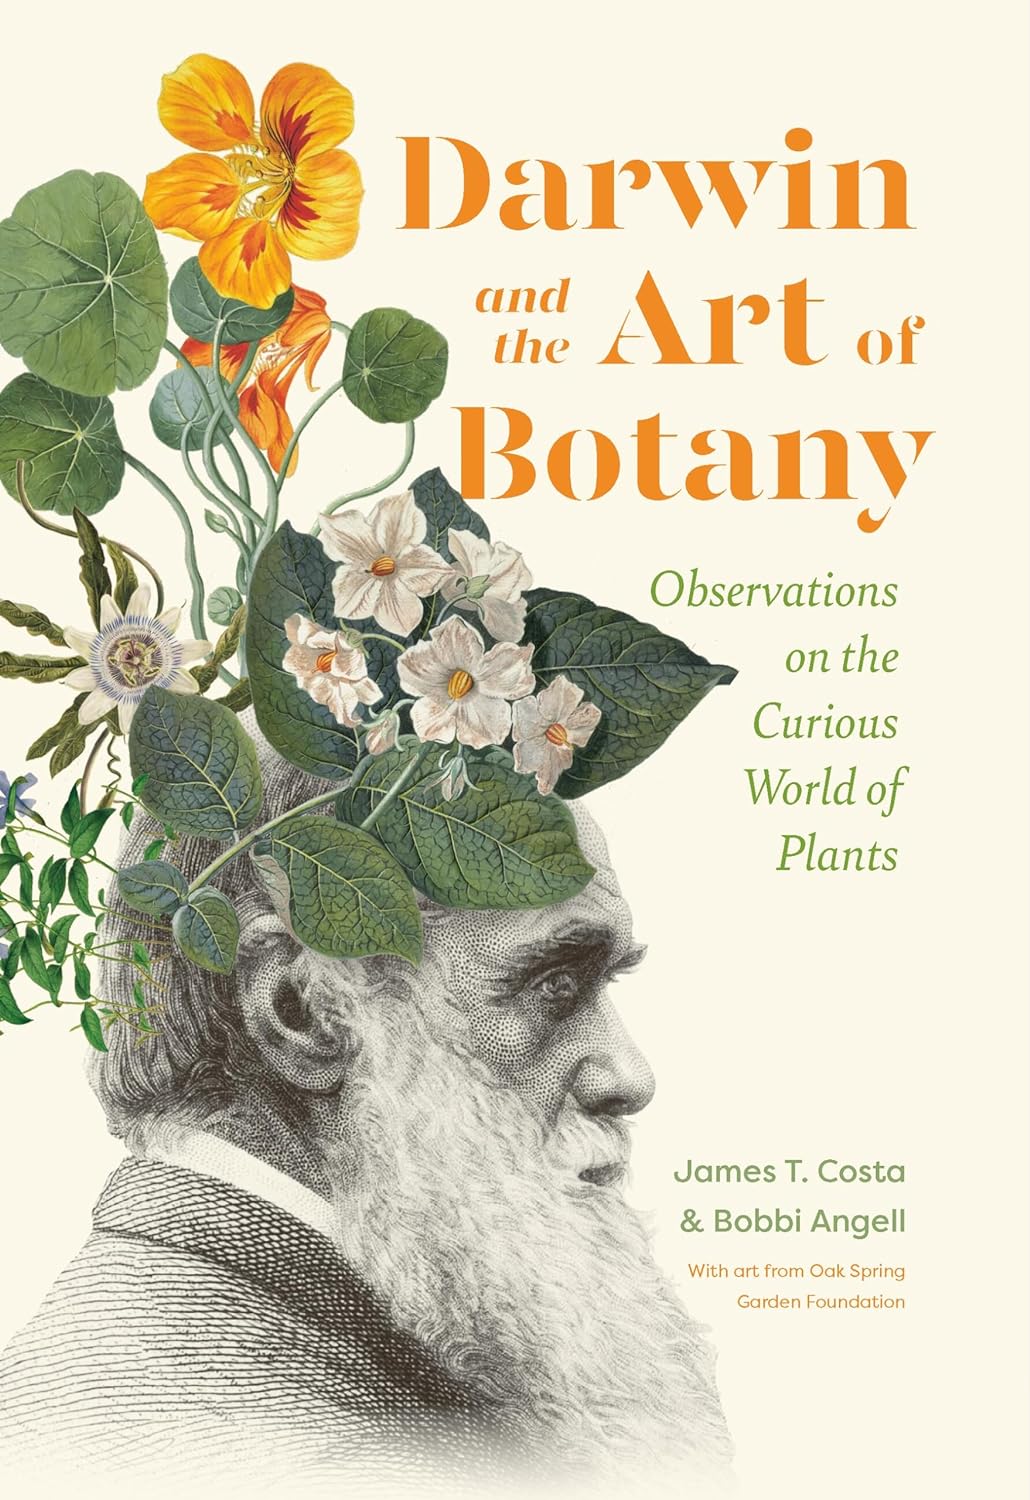 Darwin and the Art of Botany: Observations on the Curious World of Plants Hardcover